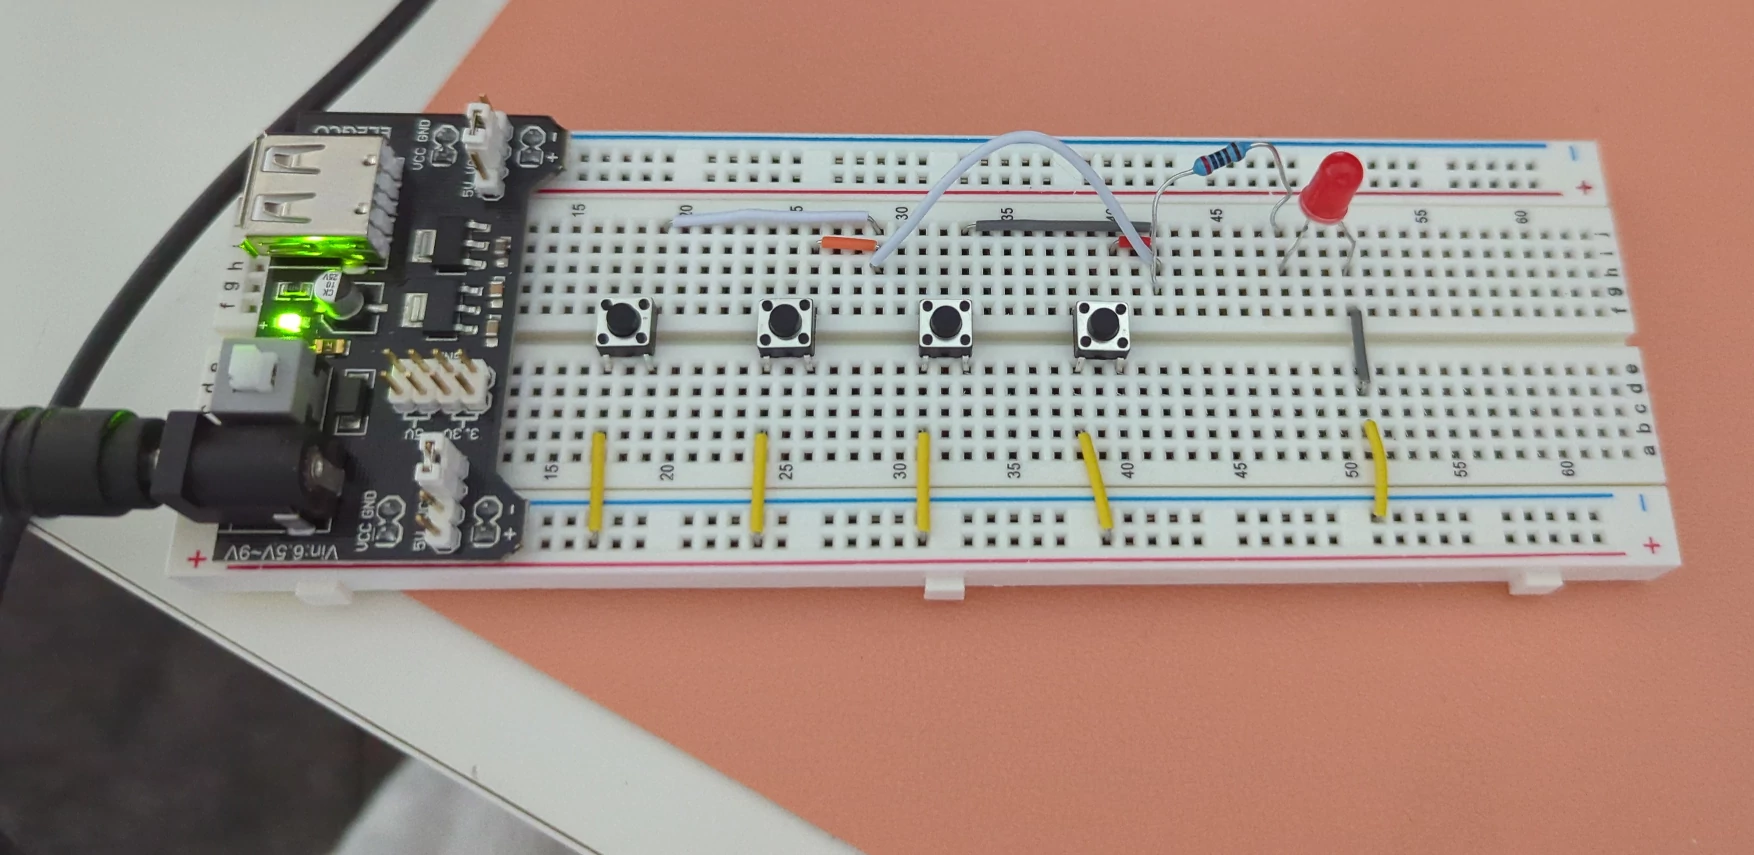 Breadboard of electronics for 4 buttons turning on one LED